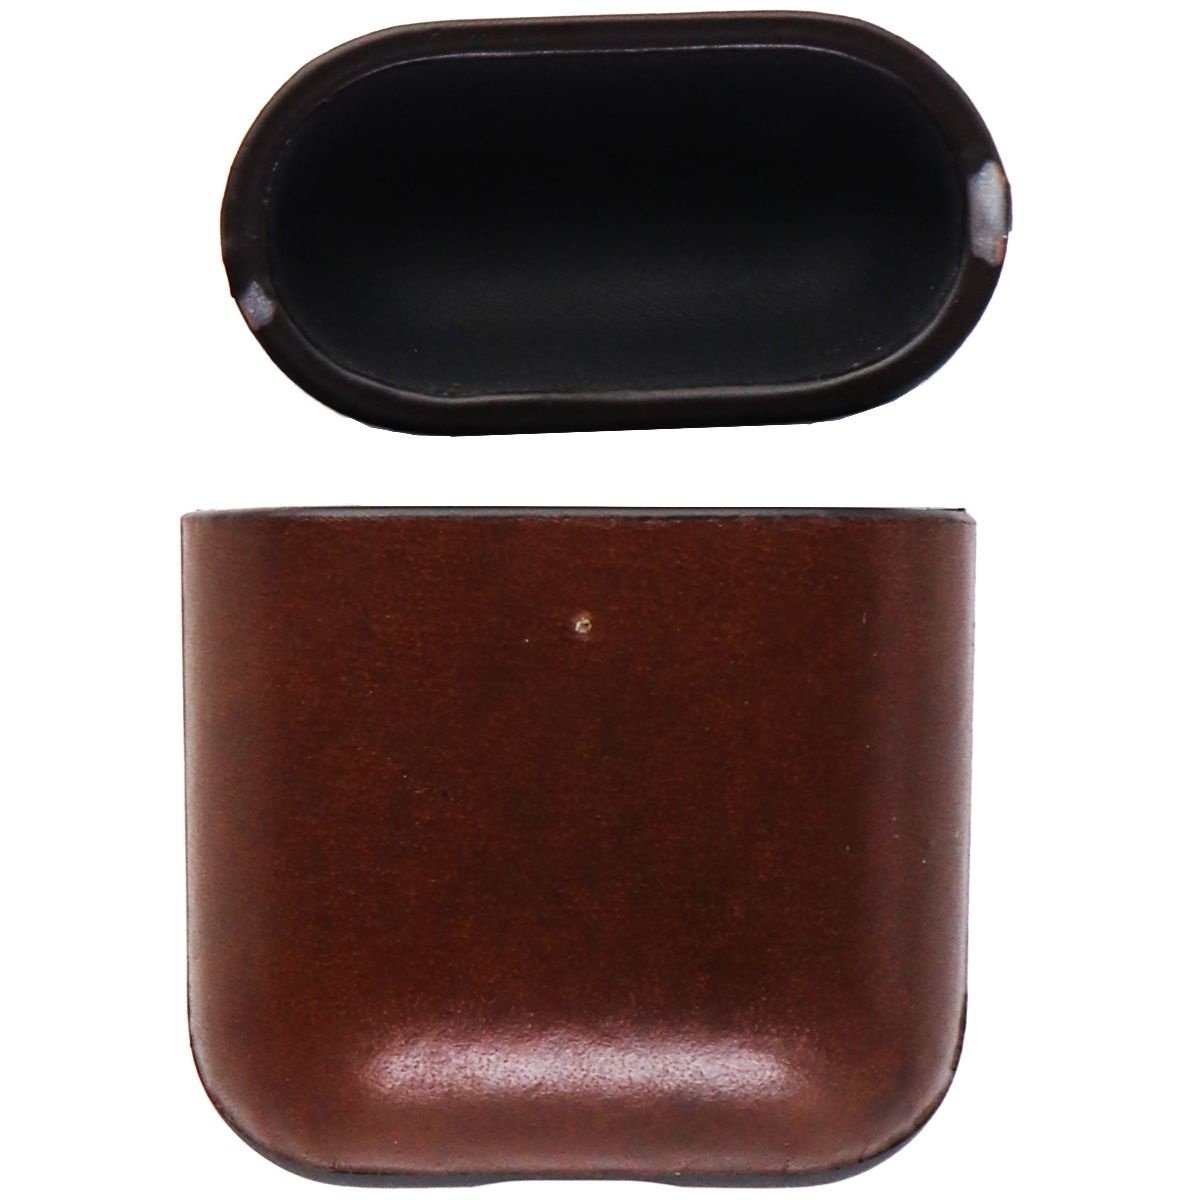 Nomad Rugged Genuine Leather Case For Apple AirPods 1 & 2 - Brown